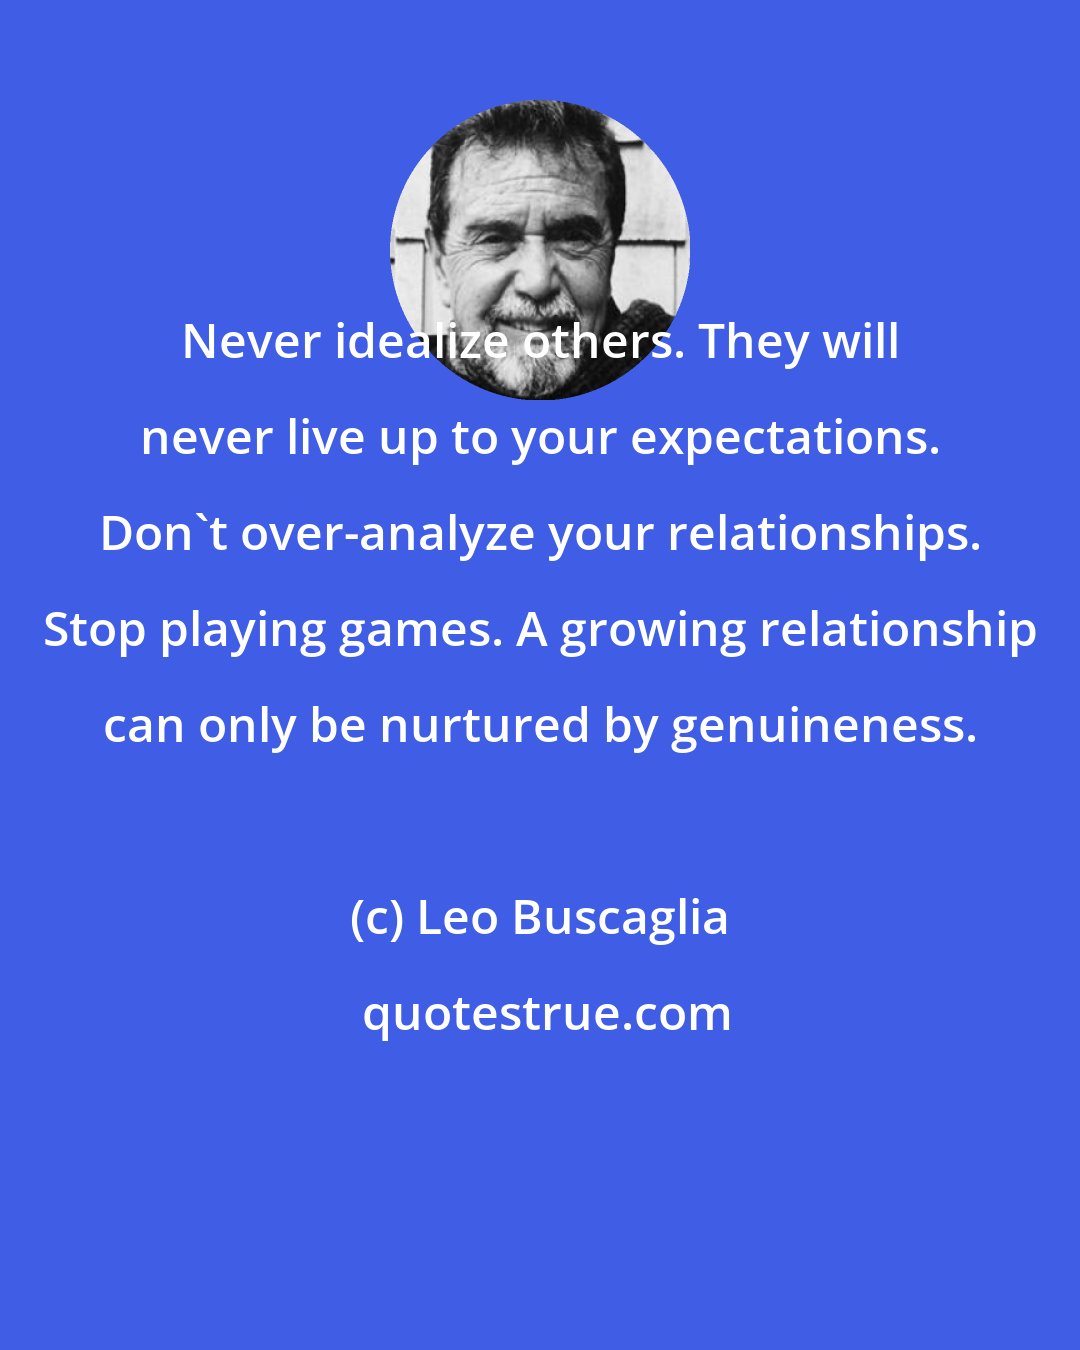 Leo Buscaglia: Never idealize others. They will never live up to your expectations. Don't over-analyze your relationships. Stop playing games. A growing relationship can only be nurtured by genuineness.